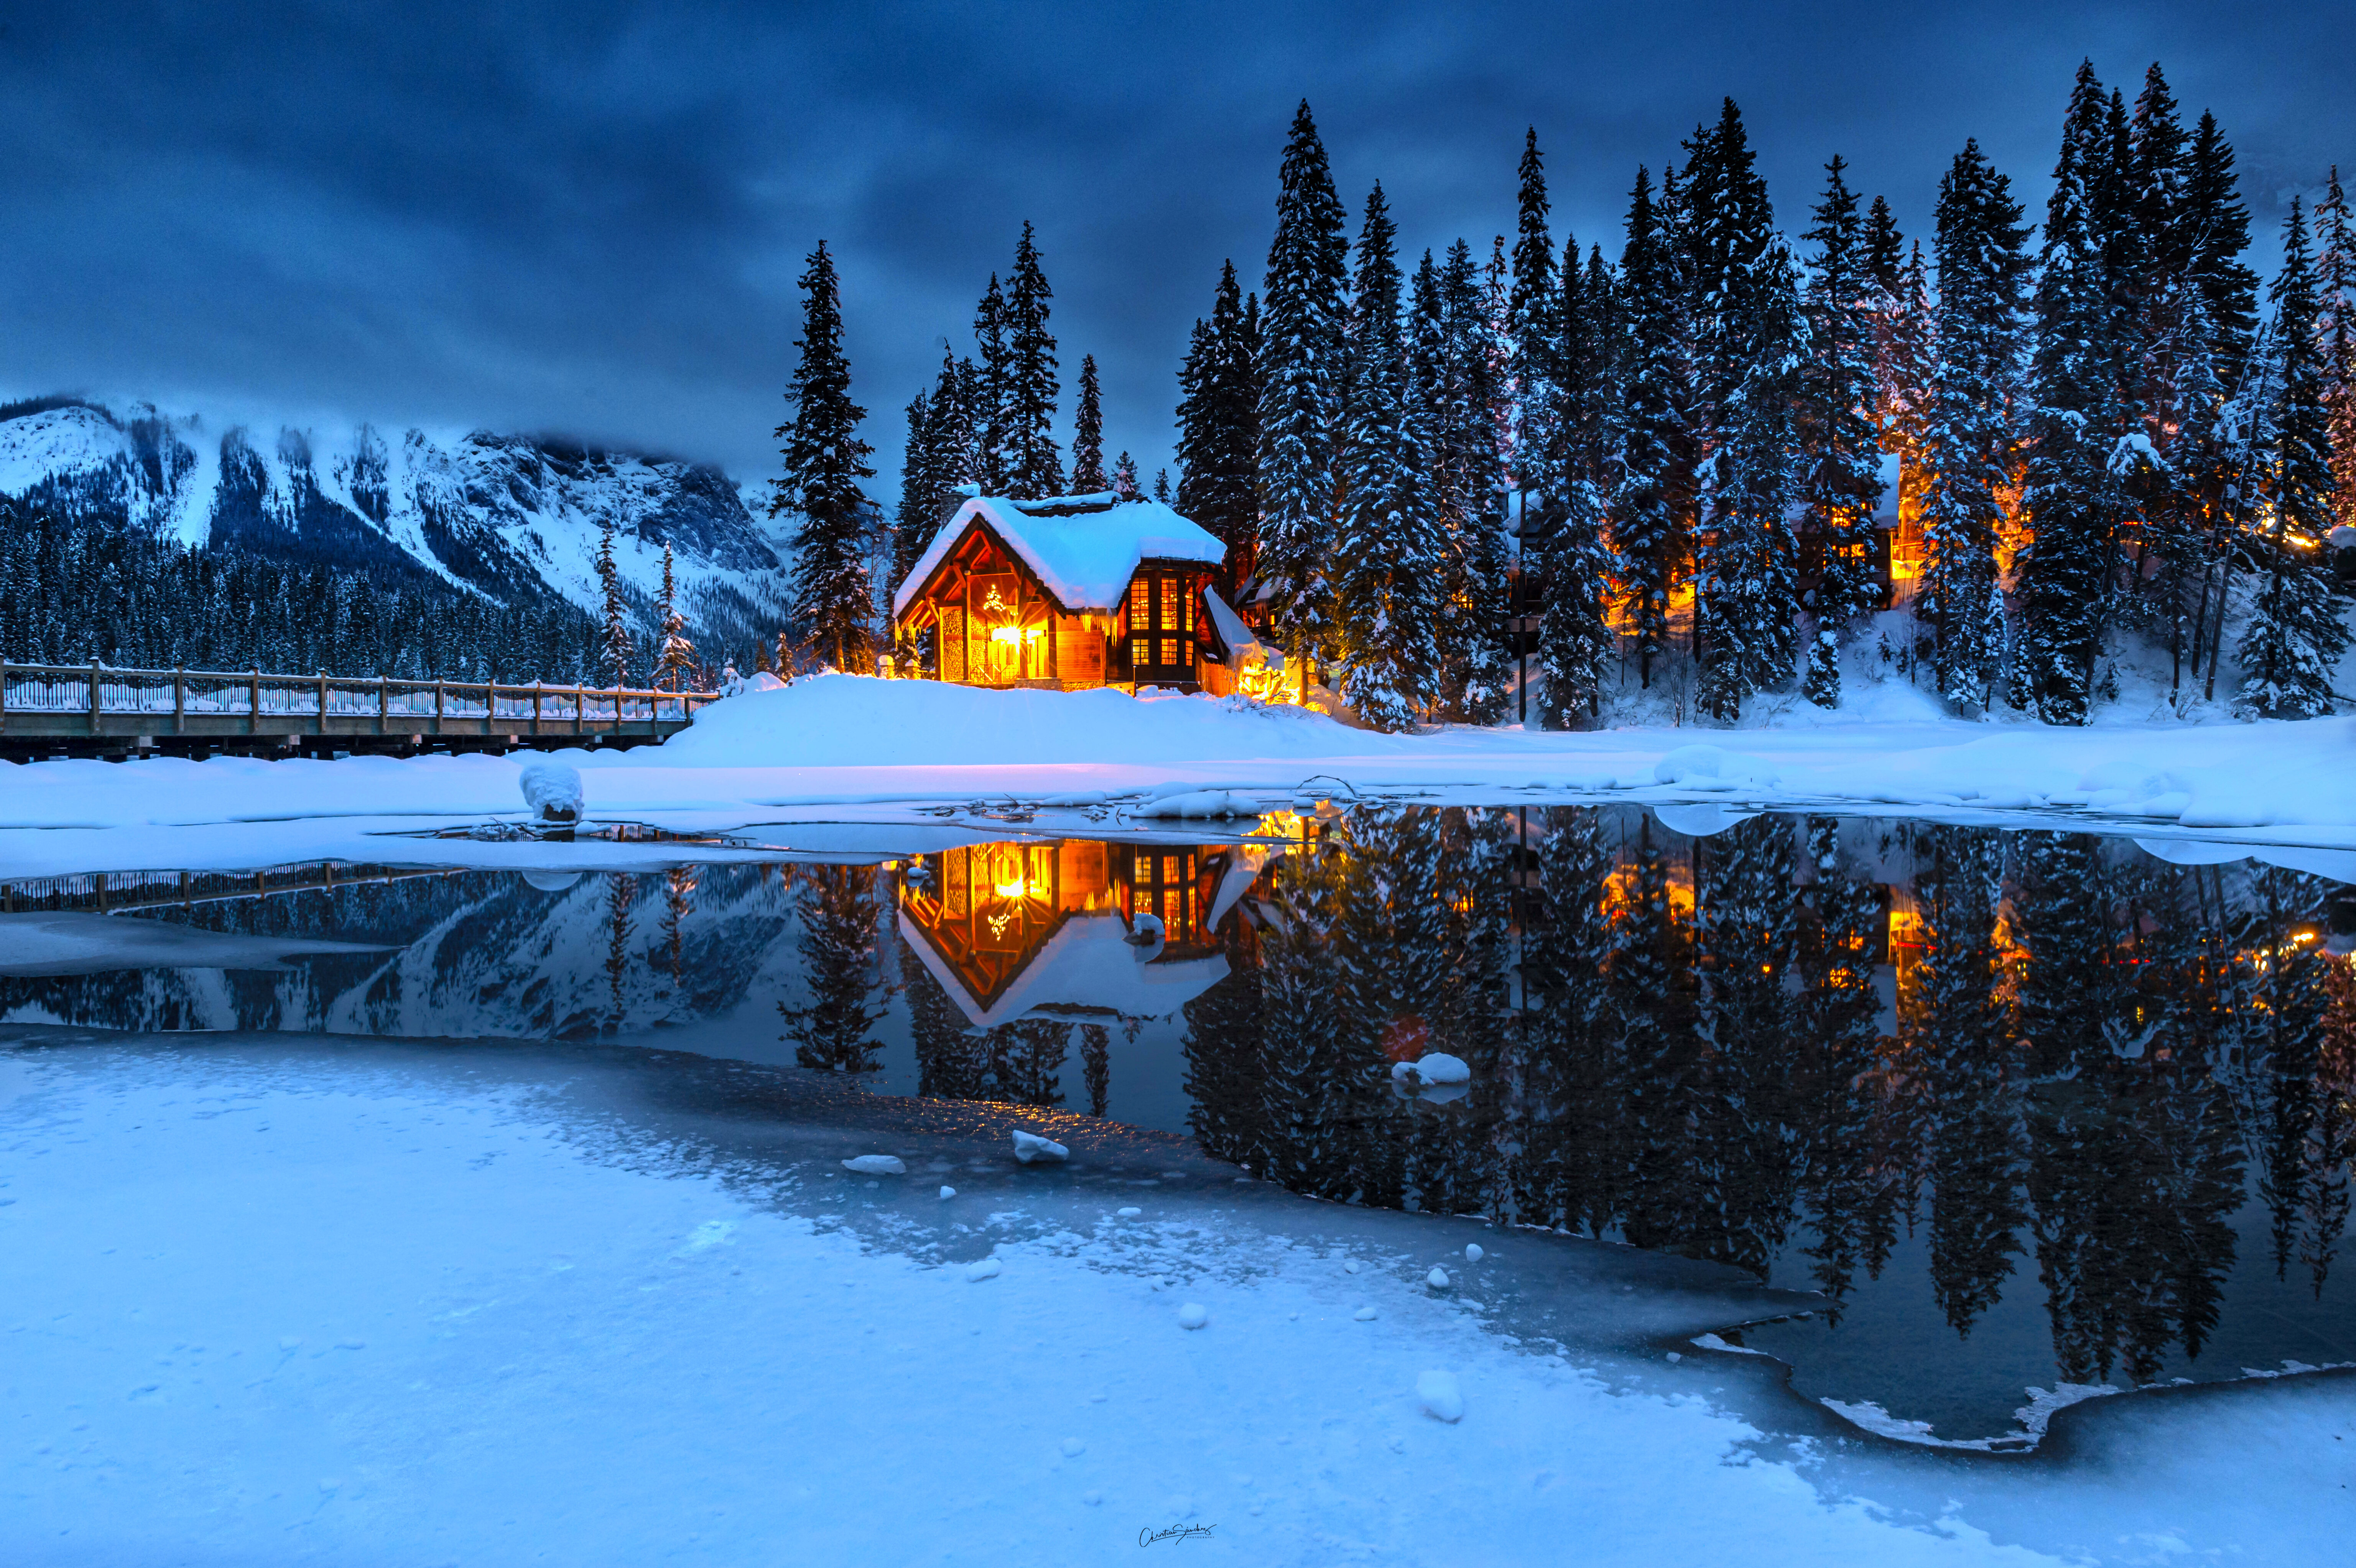 Winter Cabin Night House Lake Water Trees Snow Landscape 6144x4090